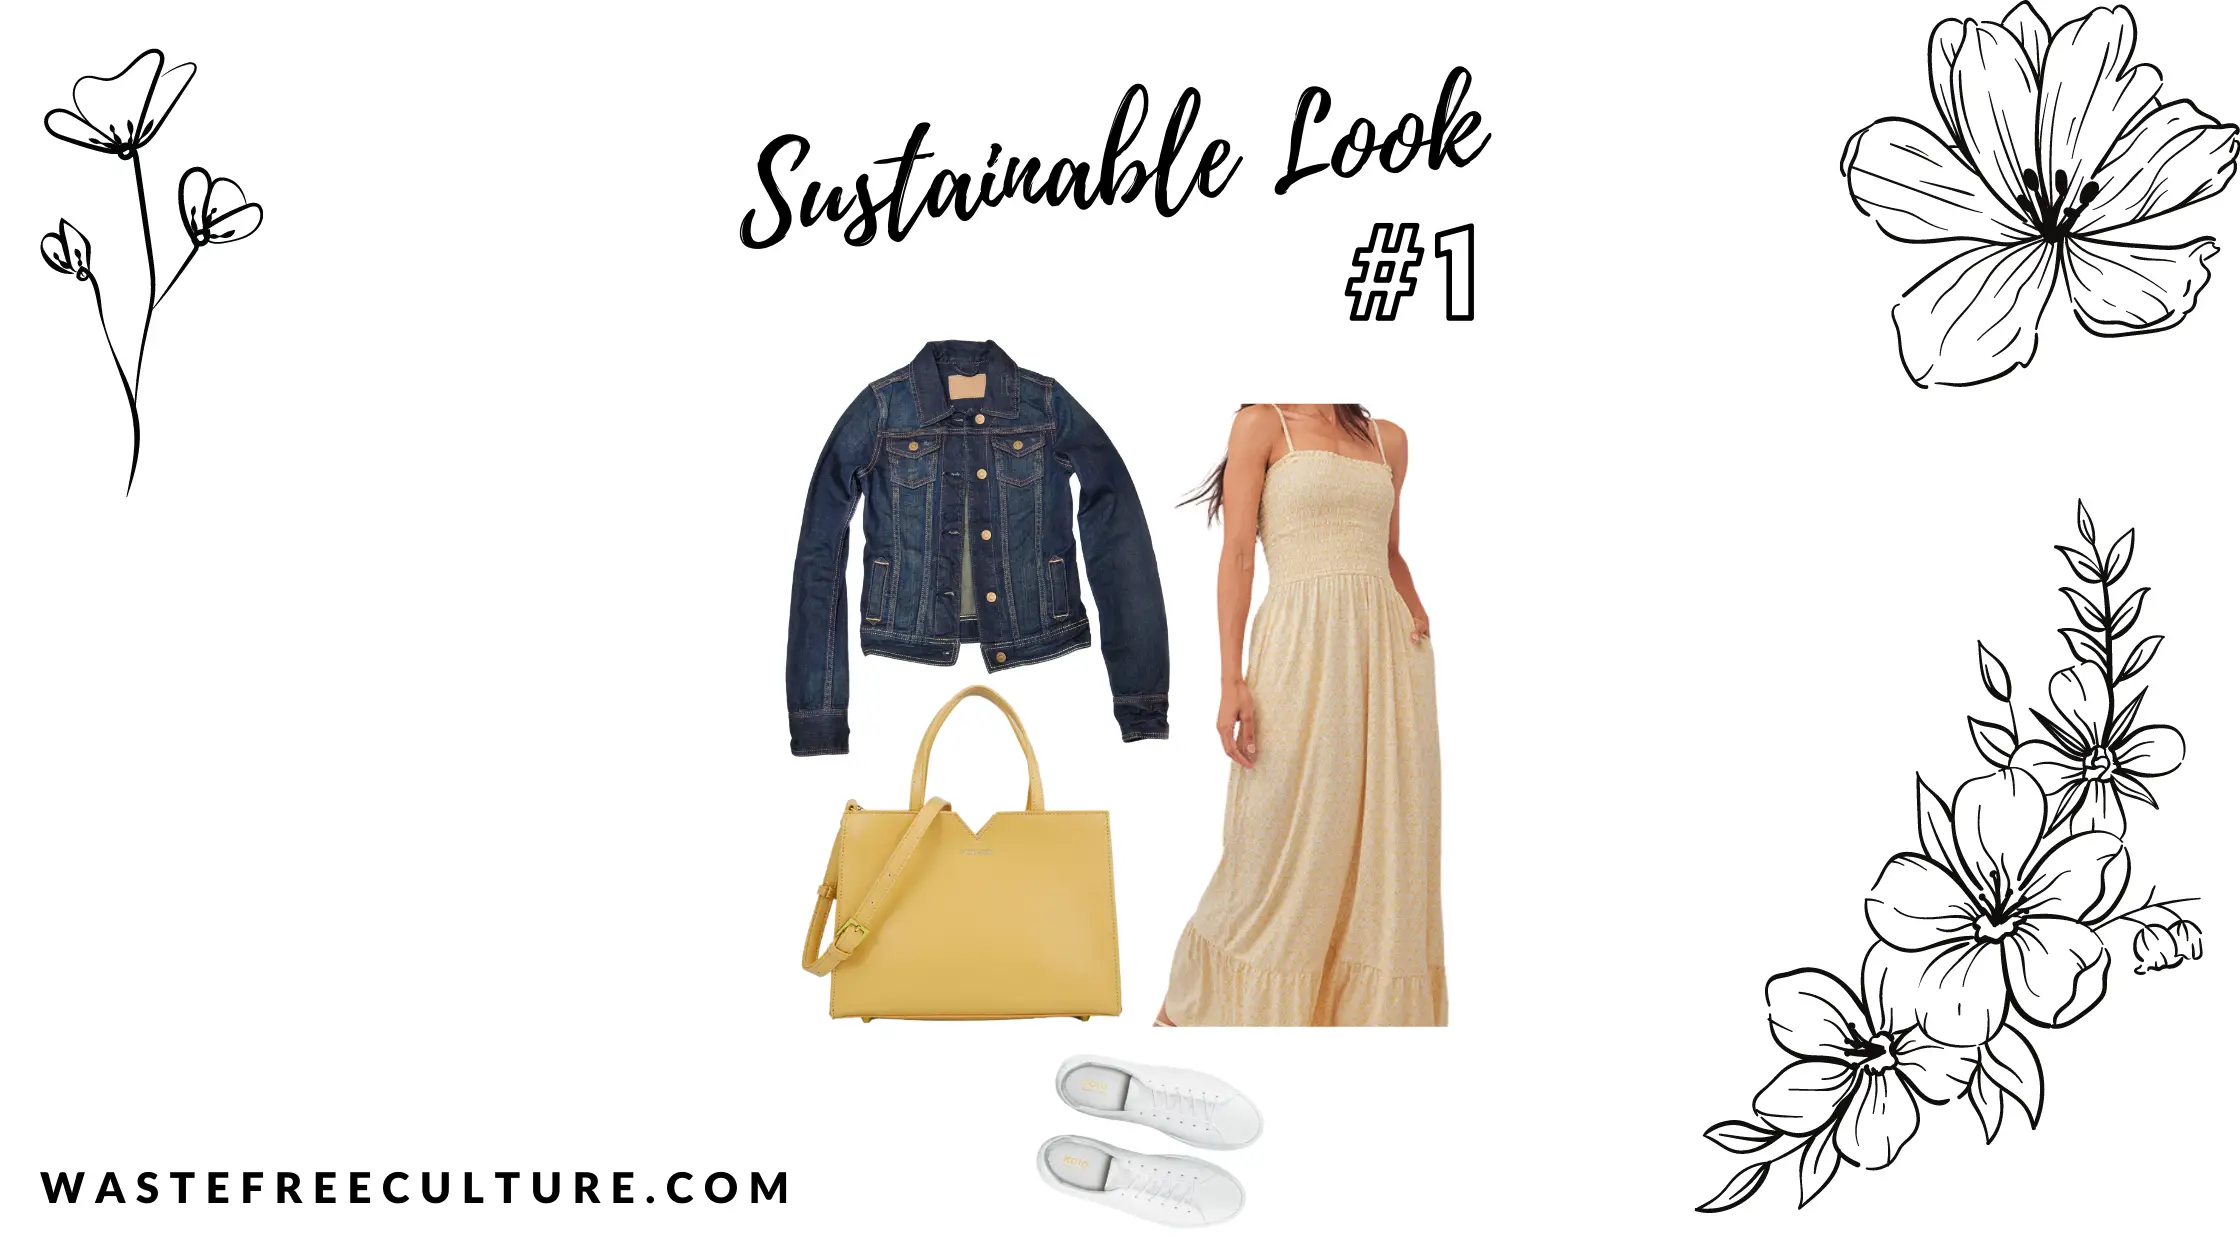 Sustainable Look for Woman #1